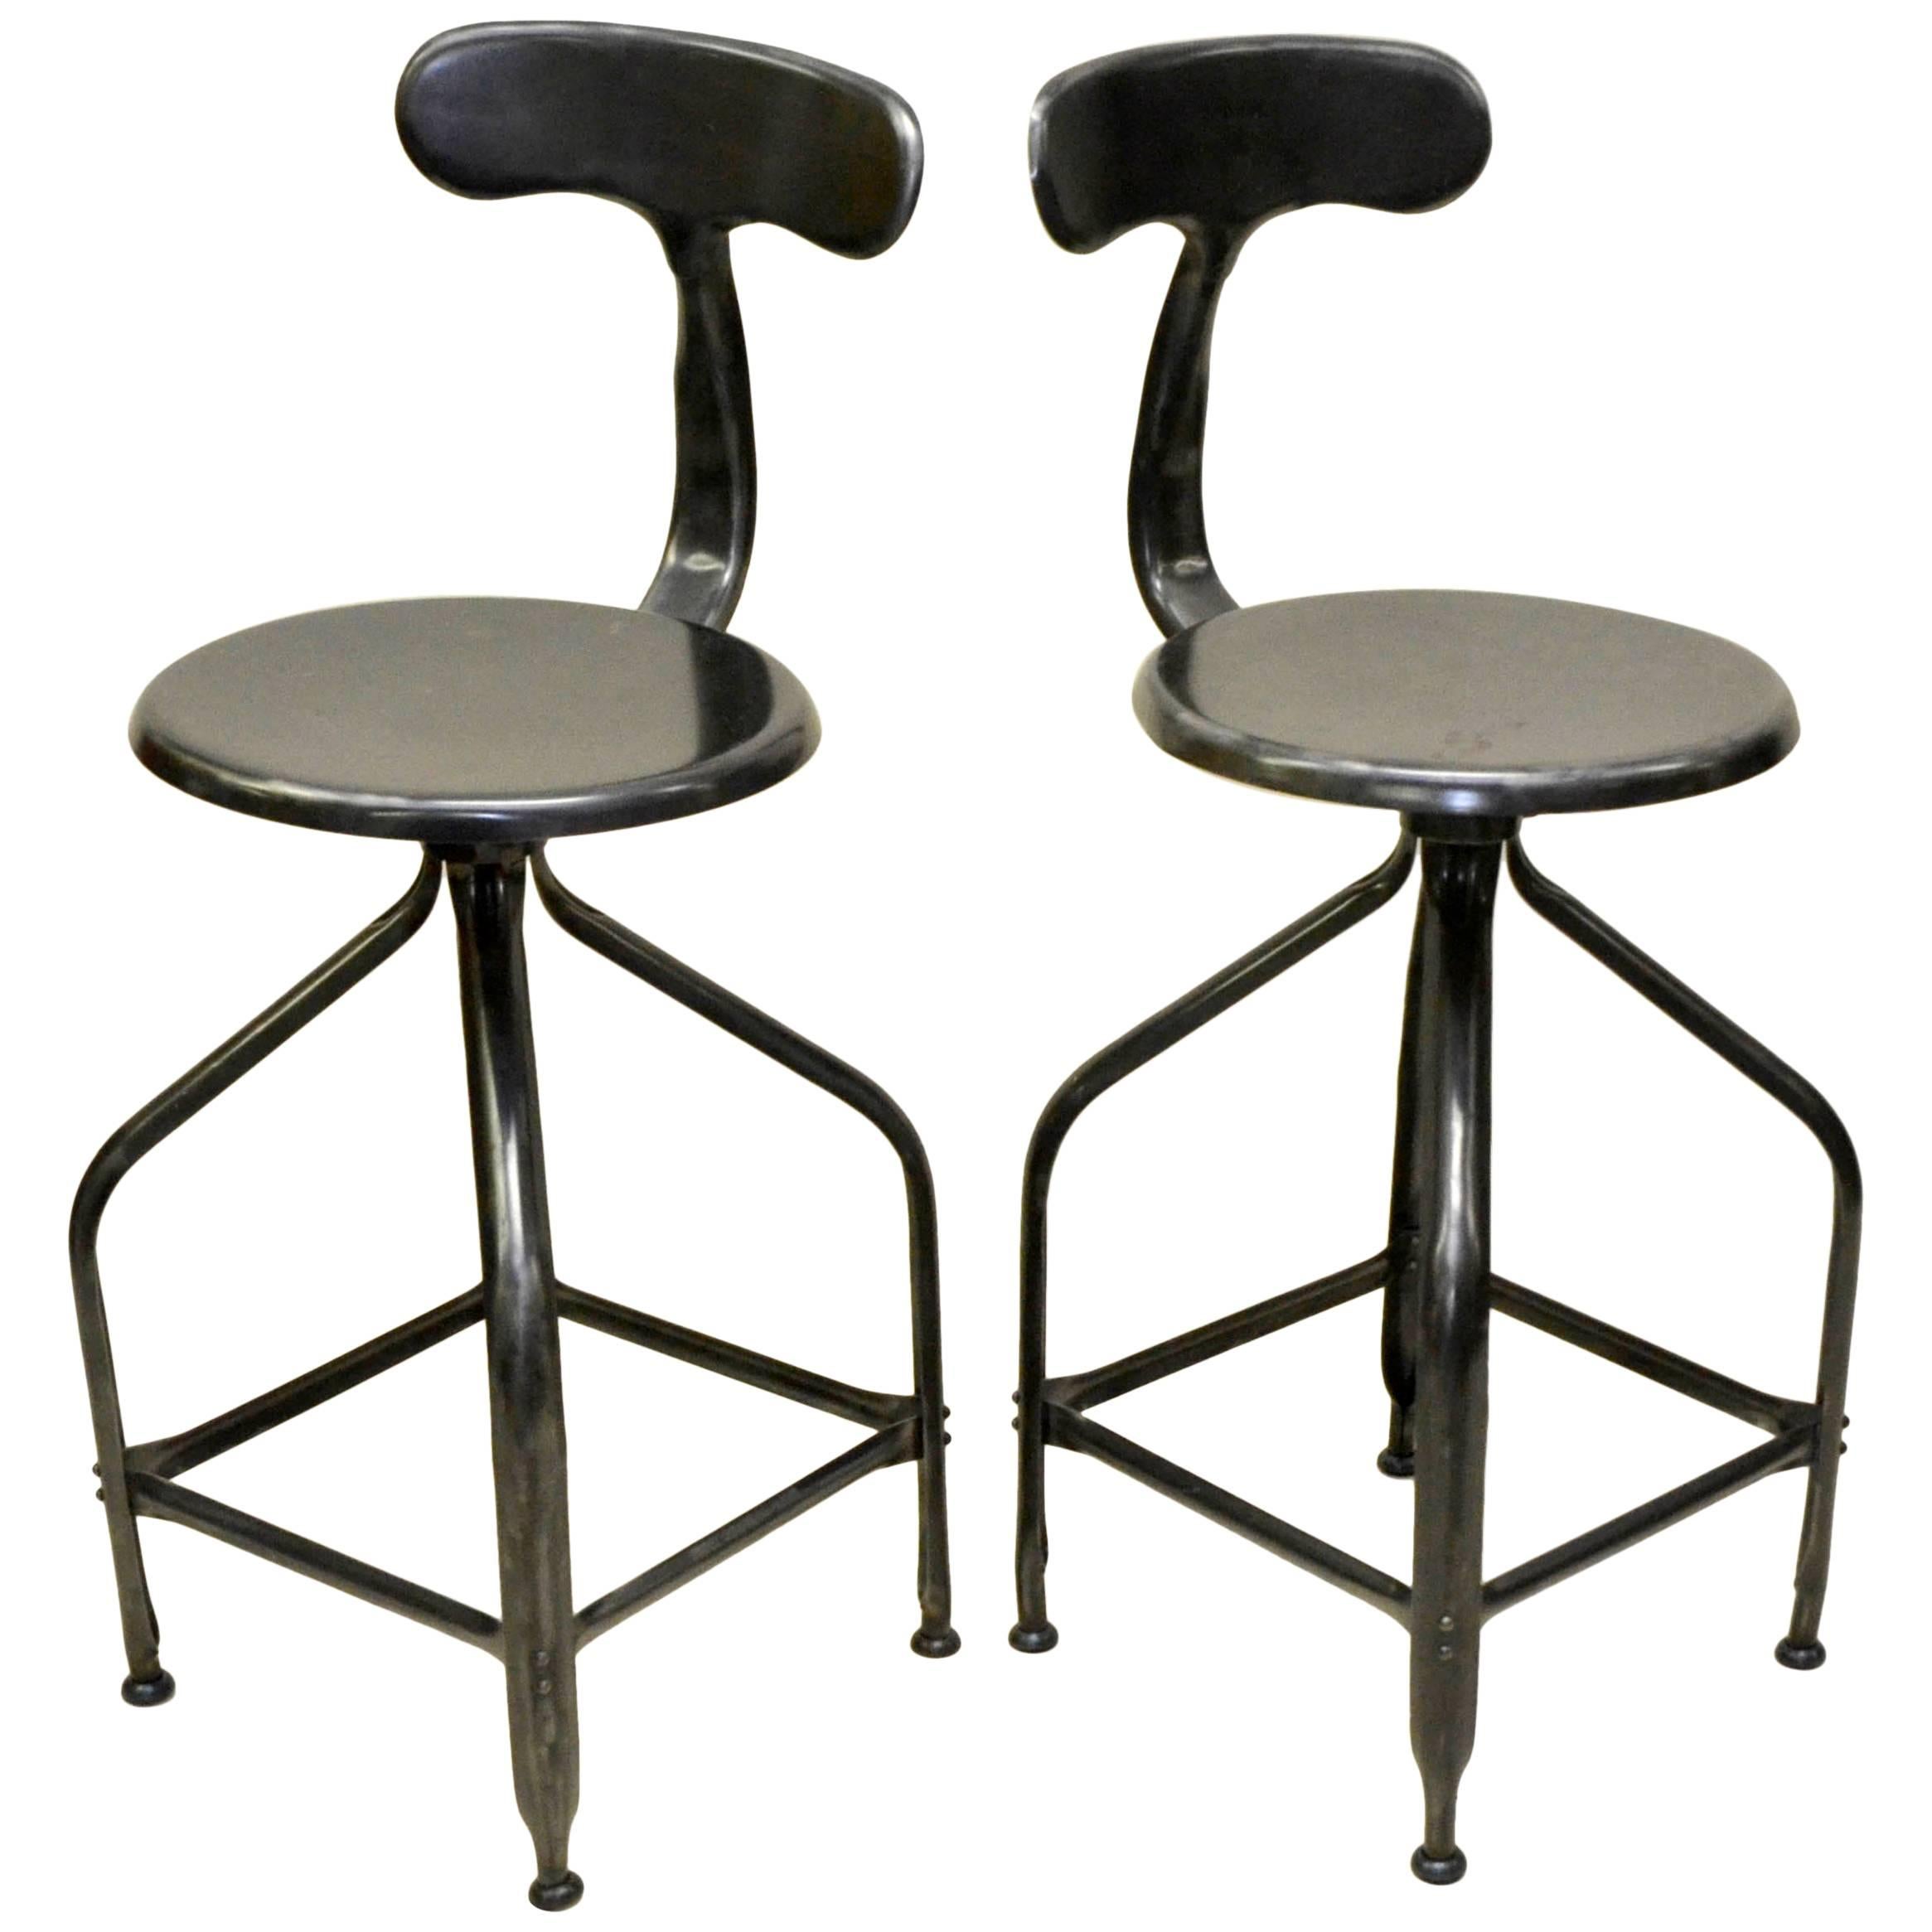 1960s French Nicolle Industrial Vintage Adjustable Metal High Stools For Sale